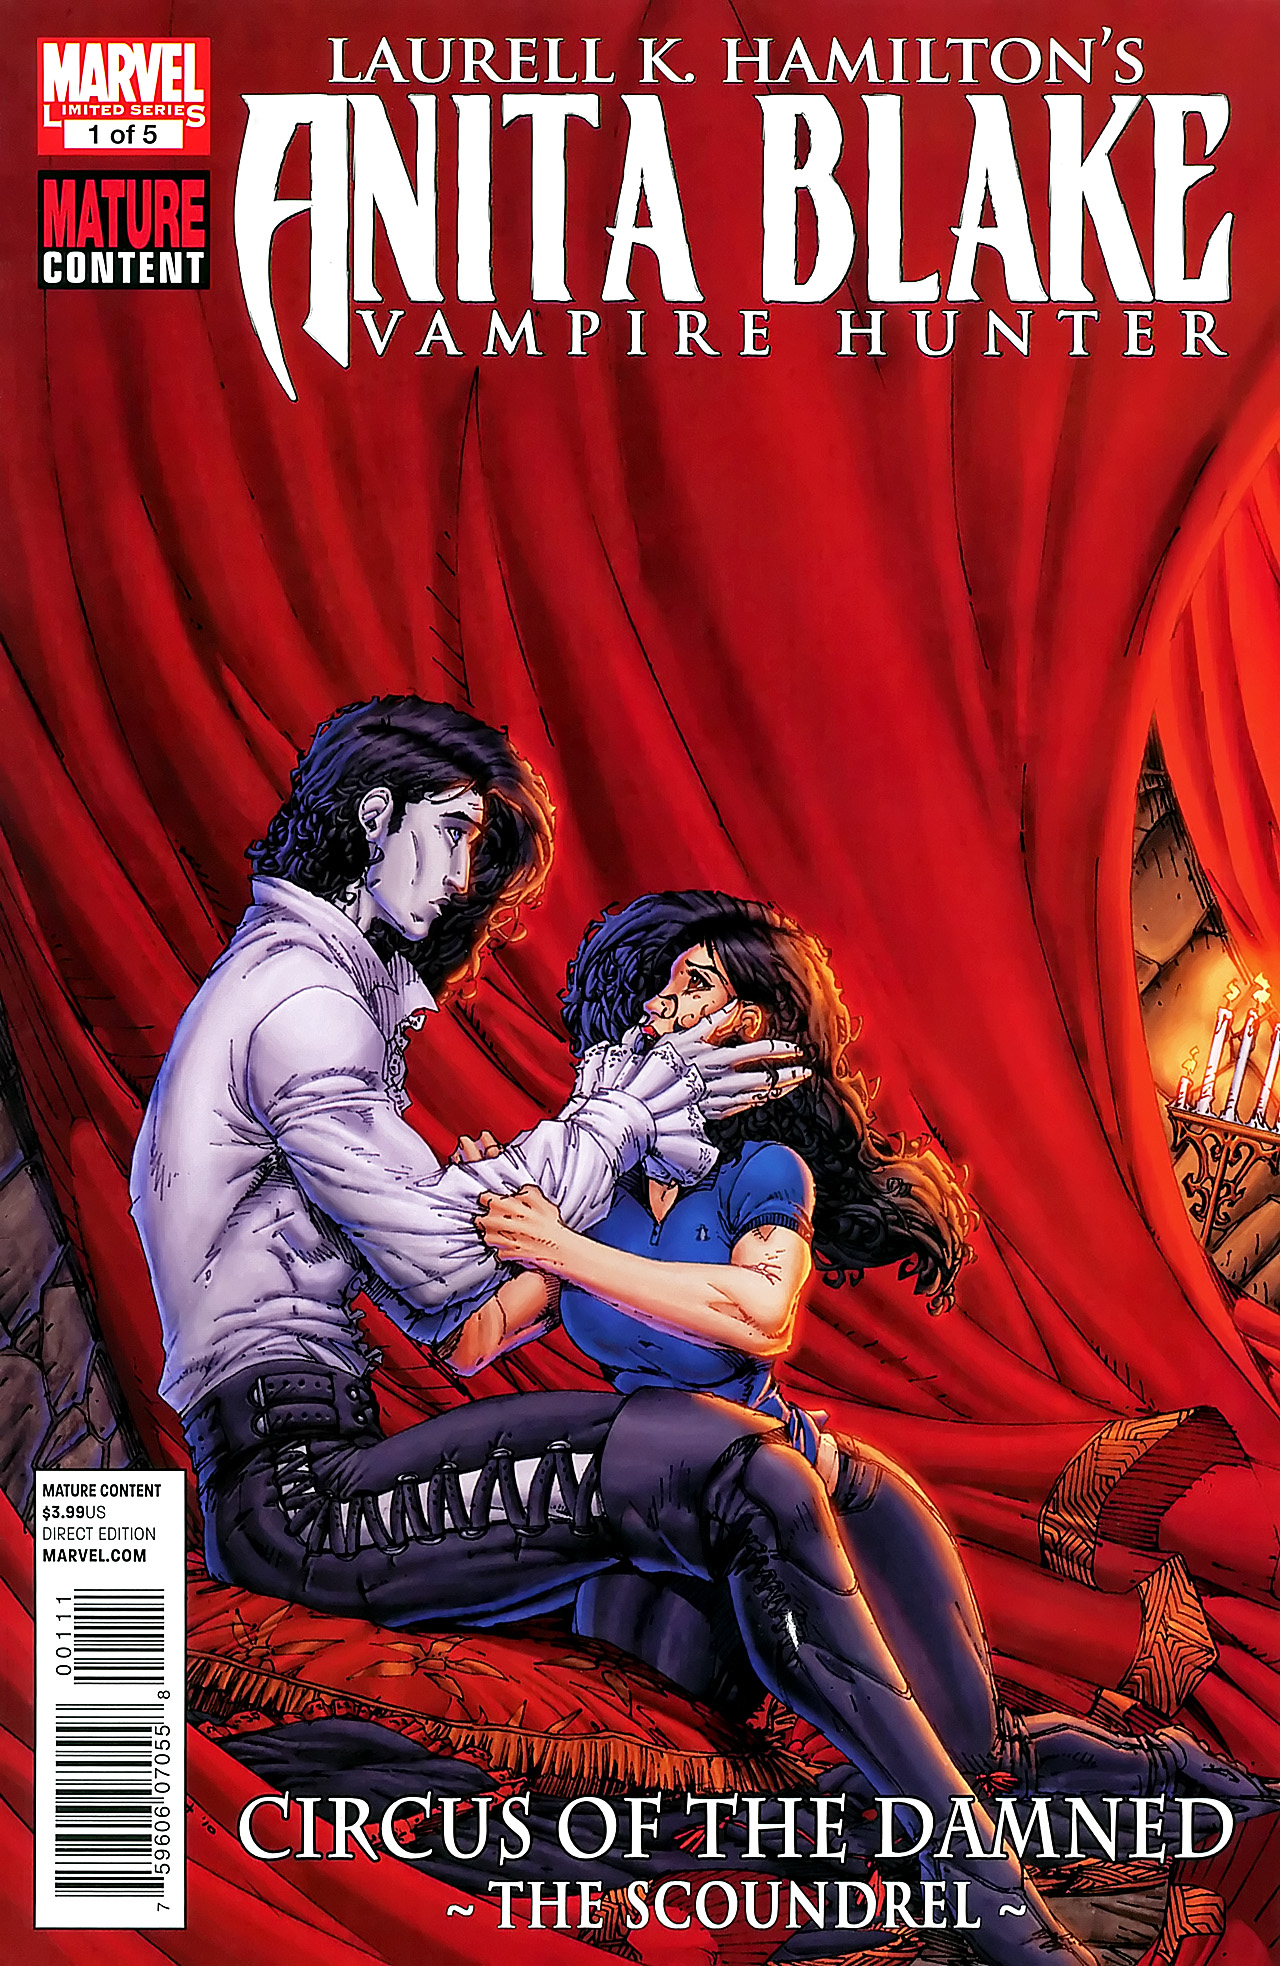 Read online Anita Blake, Vampire Hunter: Circus of the Damned - The Scoundrel comic -  Issue #1 - 1